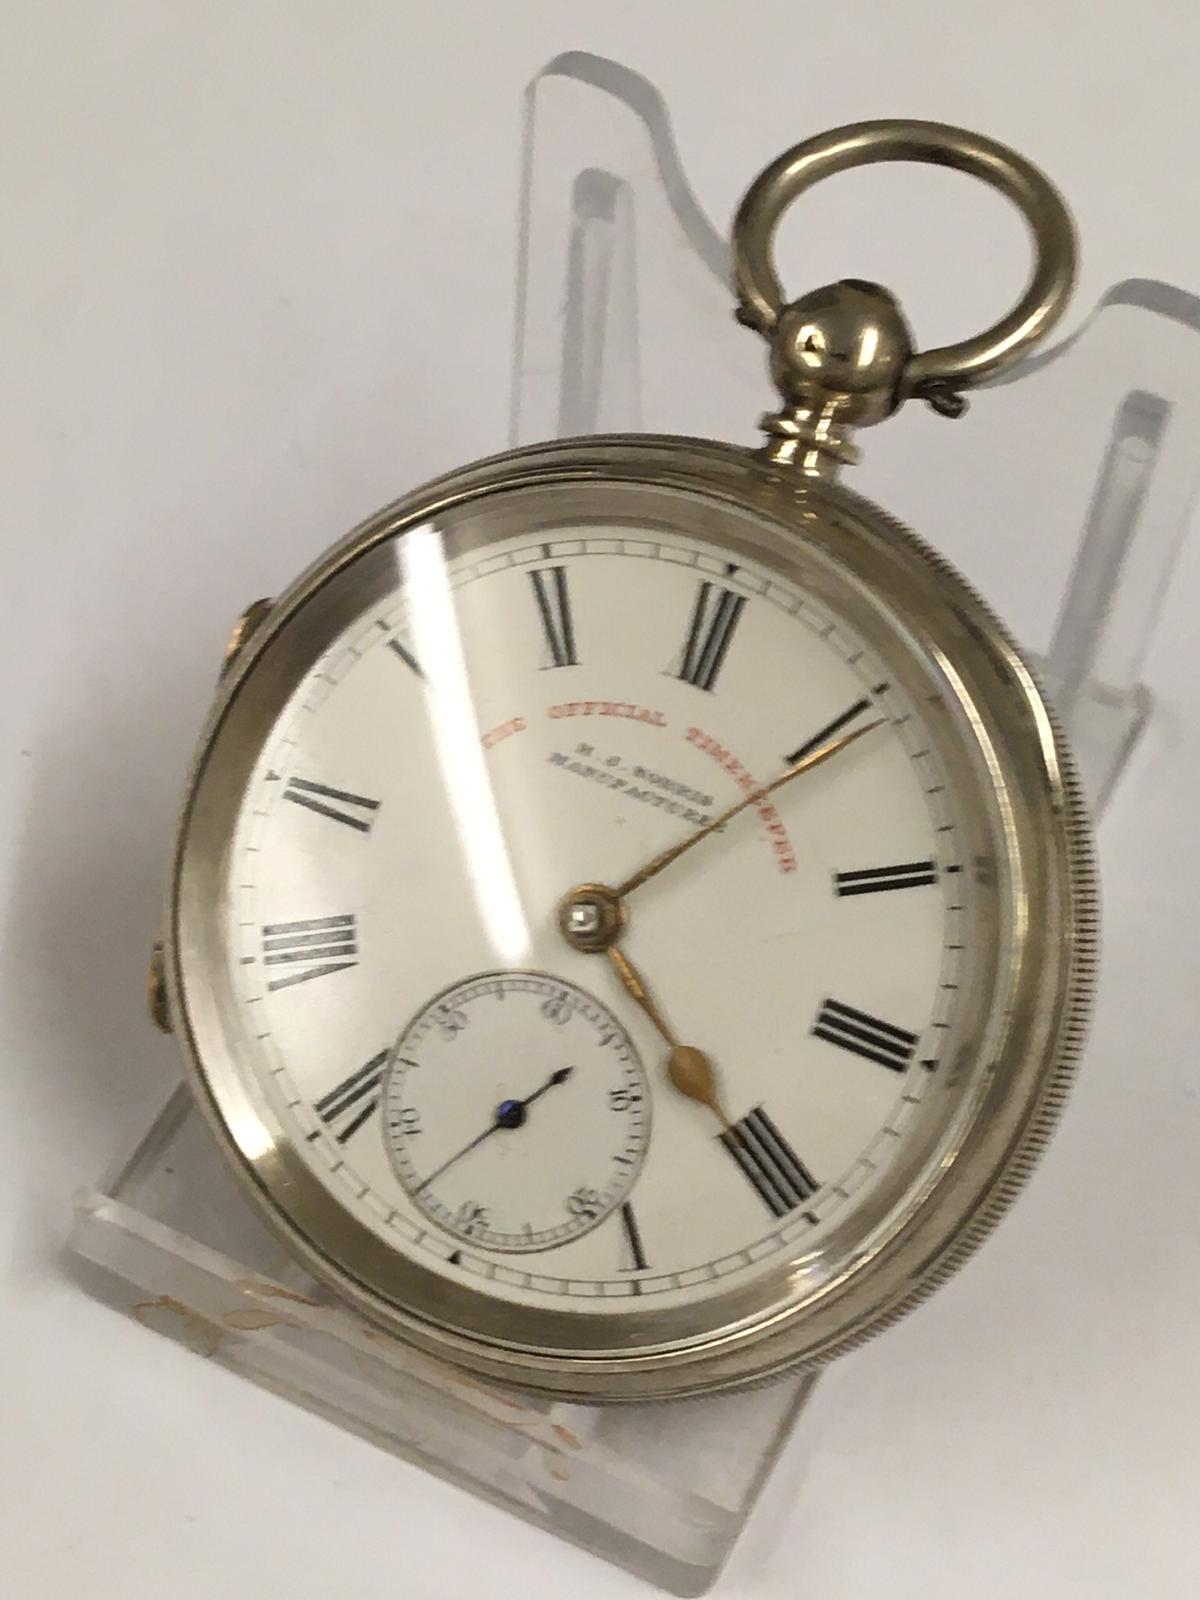 Antique silver lever pocket watch ( Coventry ). Ticks if shaken but no key . Sold with no guarantees - Image 4 of 11